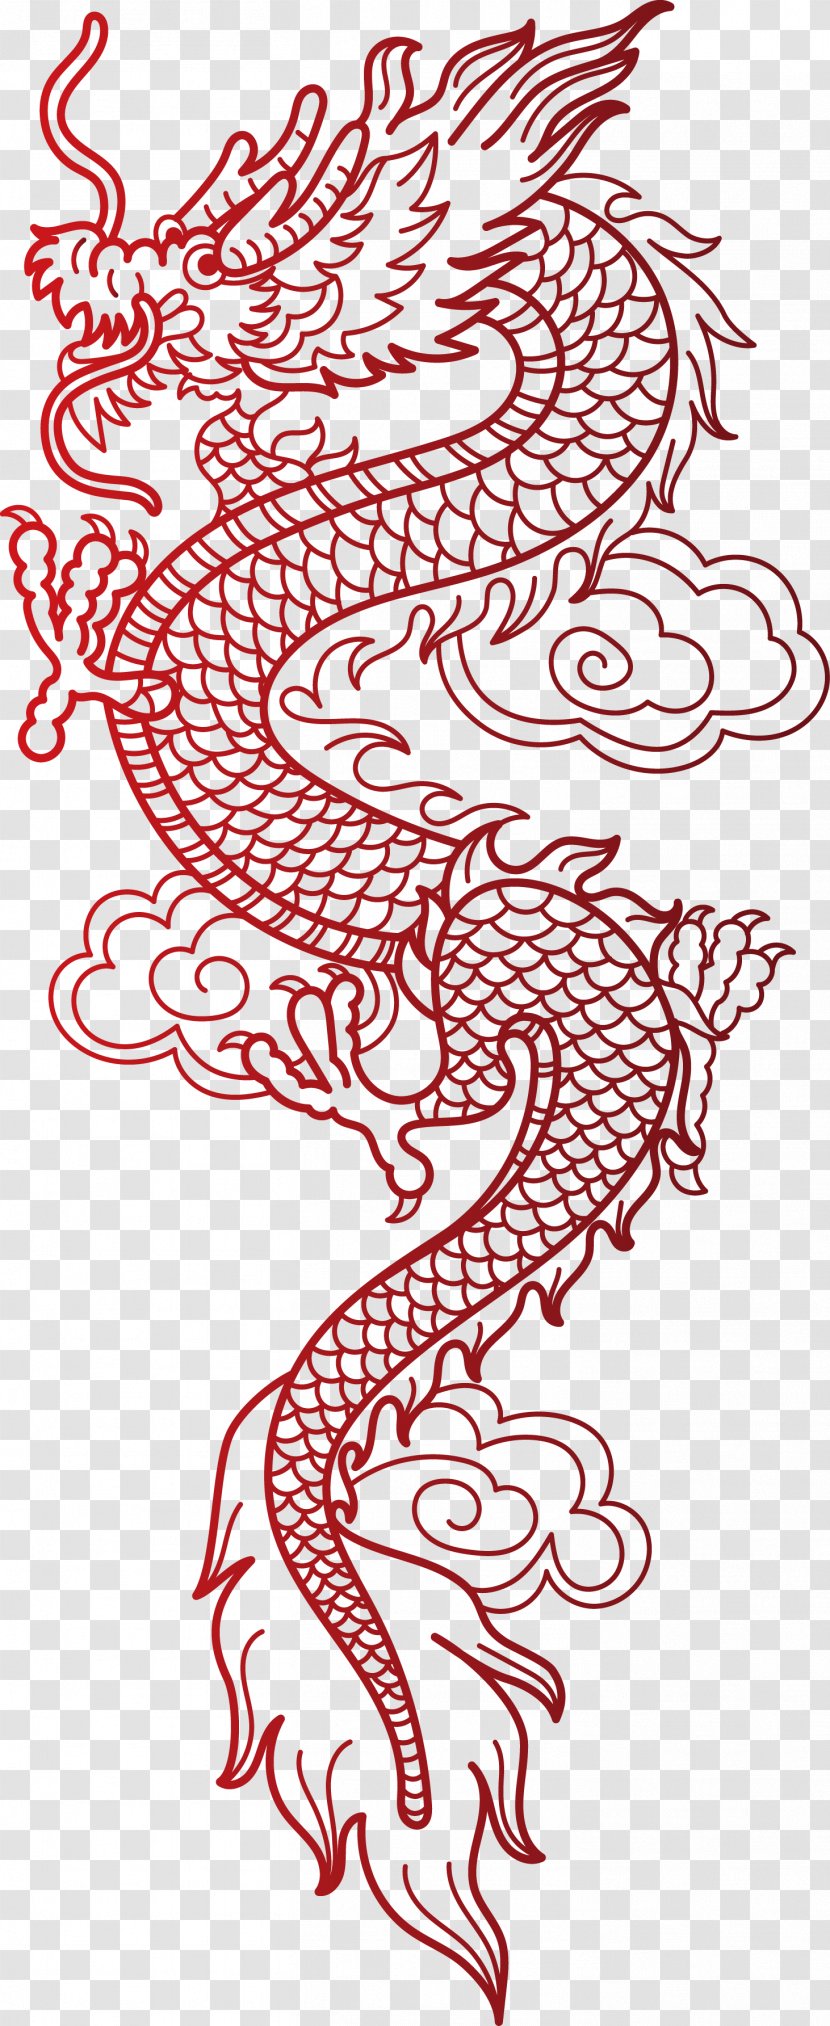 China Chinese Dragon Illustration - Silhouette - Hand-painted Totem Transparent PNG